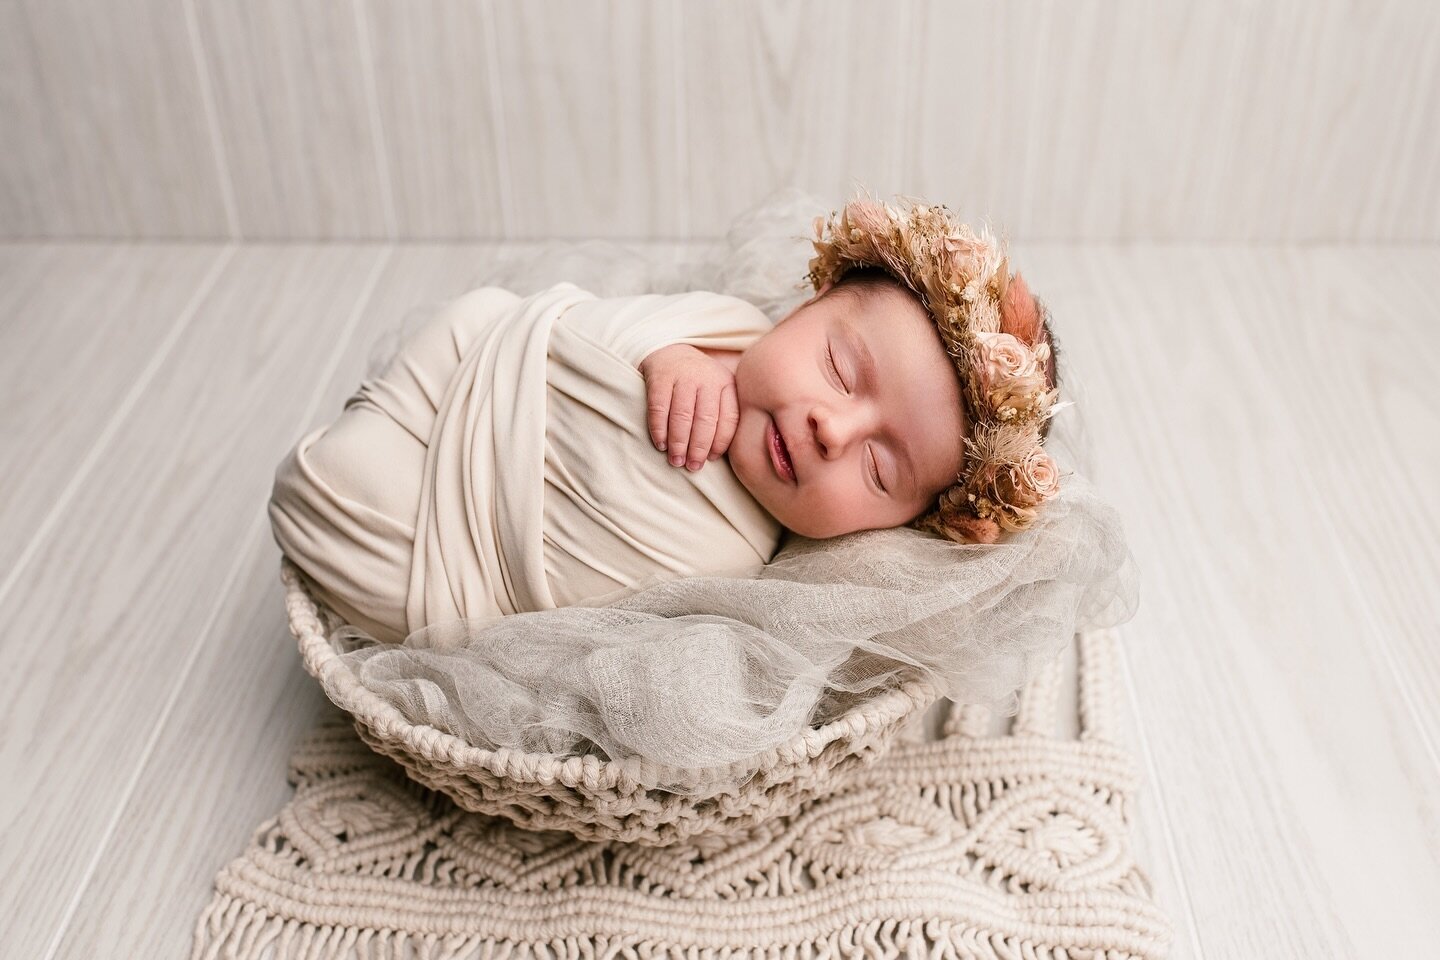 Running on empty this week. Took myself to get a decaf cup of coffee this evening just because. Pausing work to share this sweet baby girl! Loved this neutral look so much! Loved getting to use this beautiful macrame by my friend Jordan! She&rsquo;s 